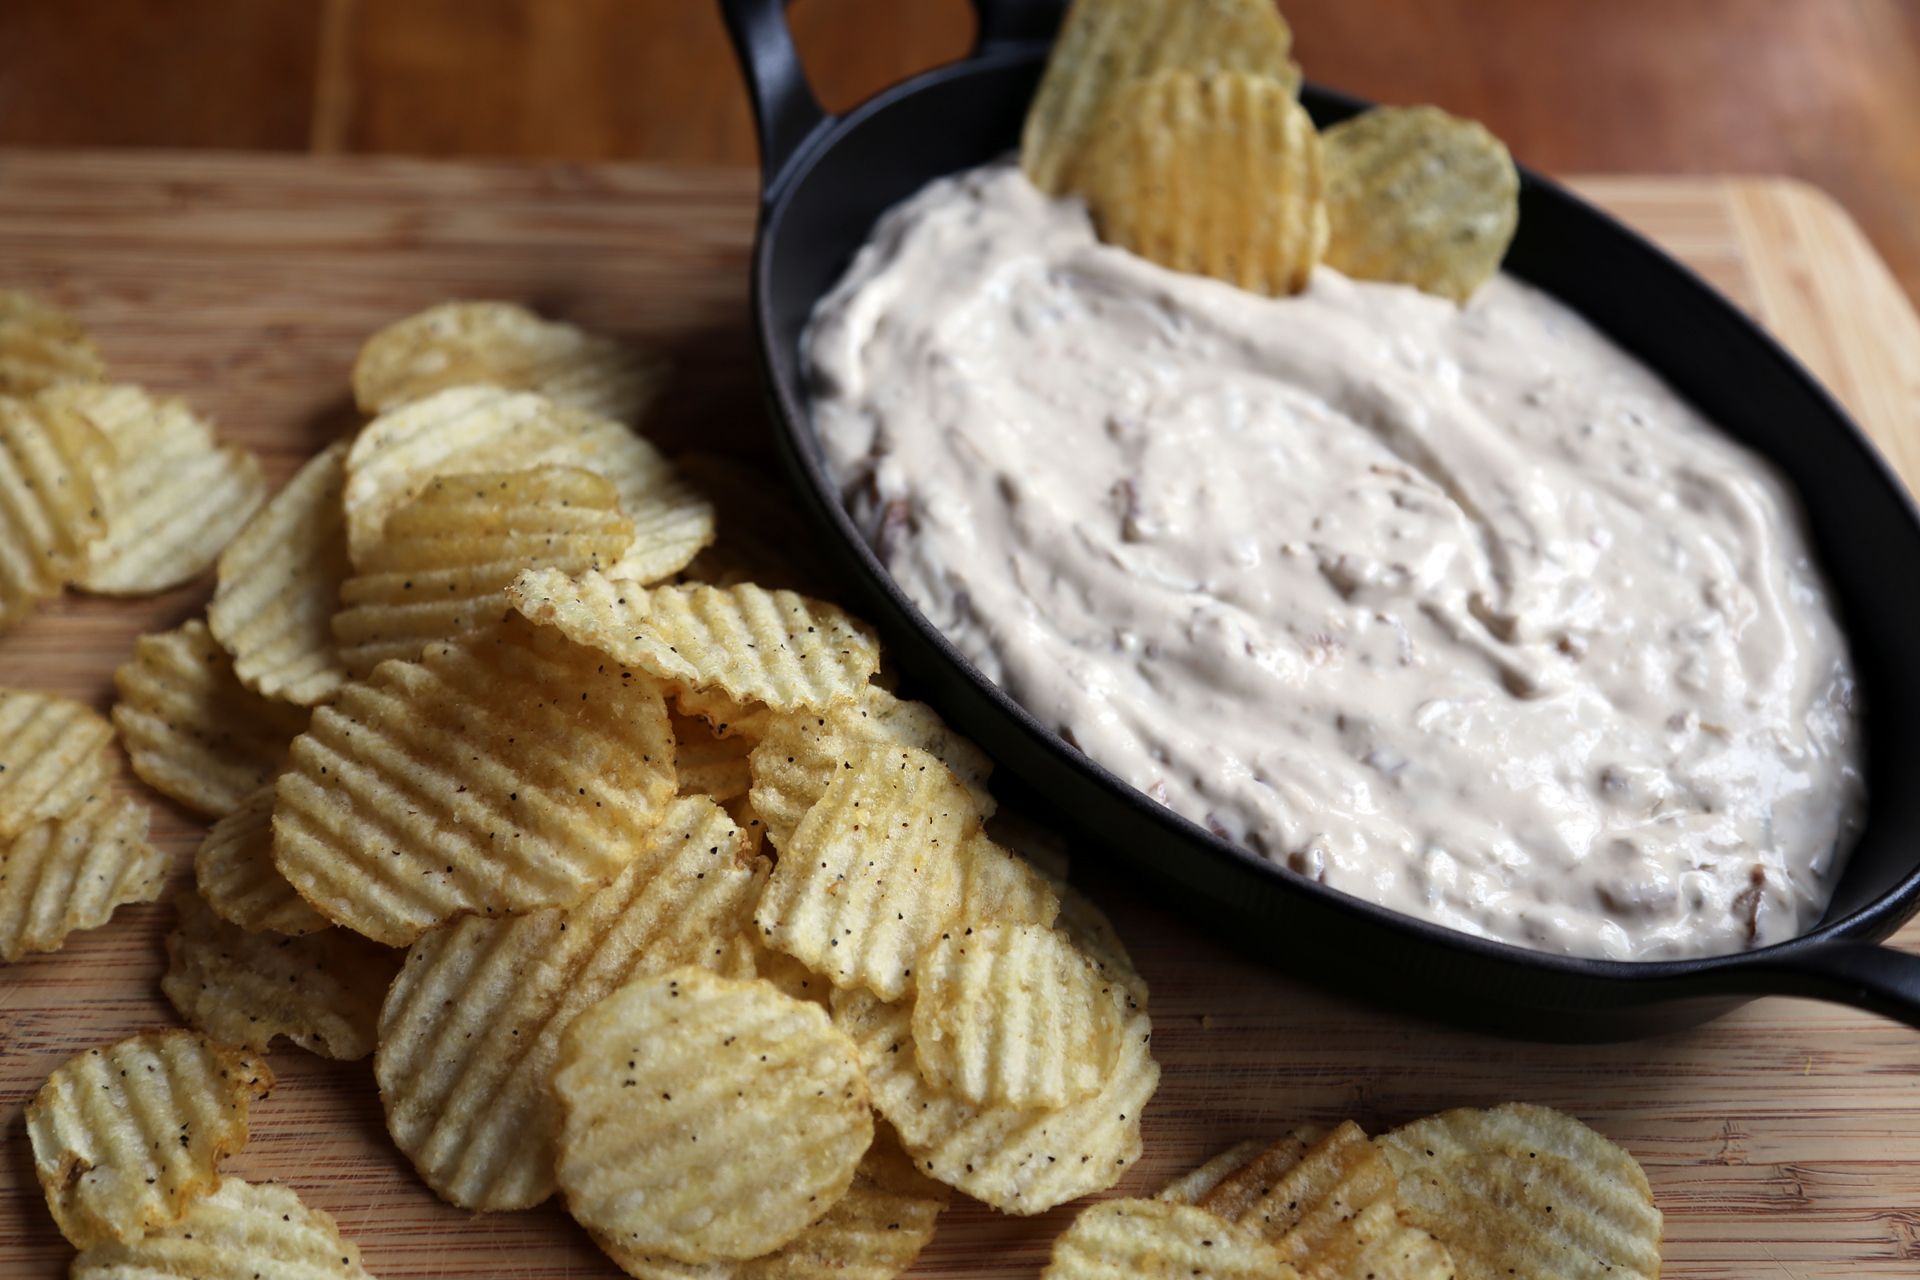 Season with salt and pepper and serve with the potato chips alongside for dipping.